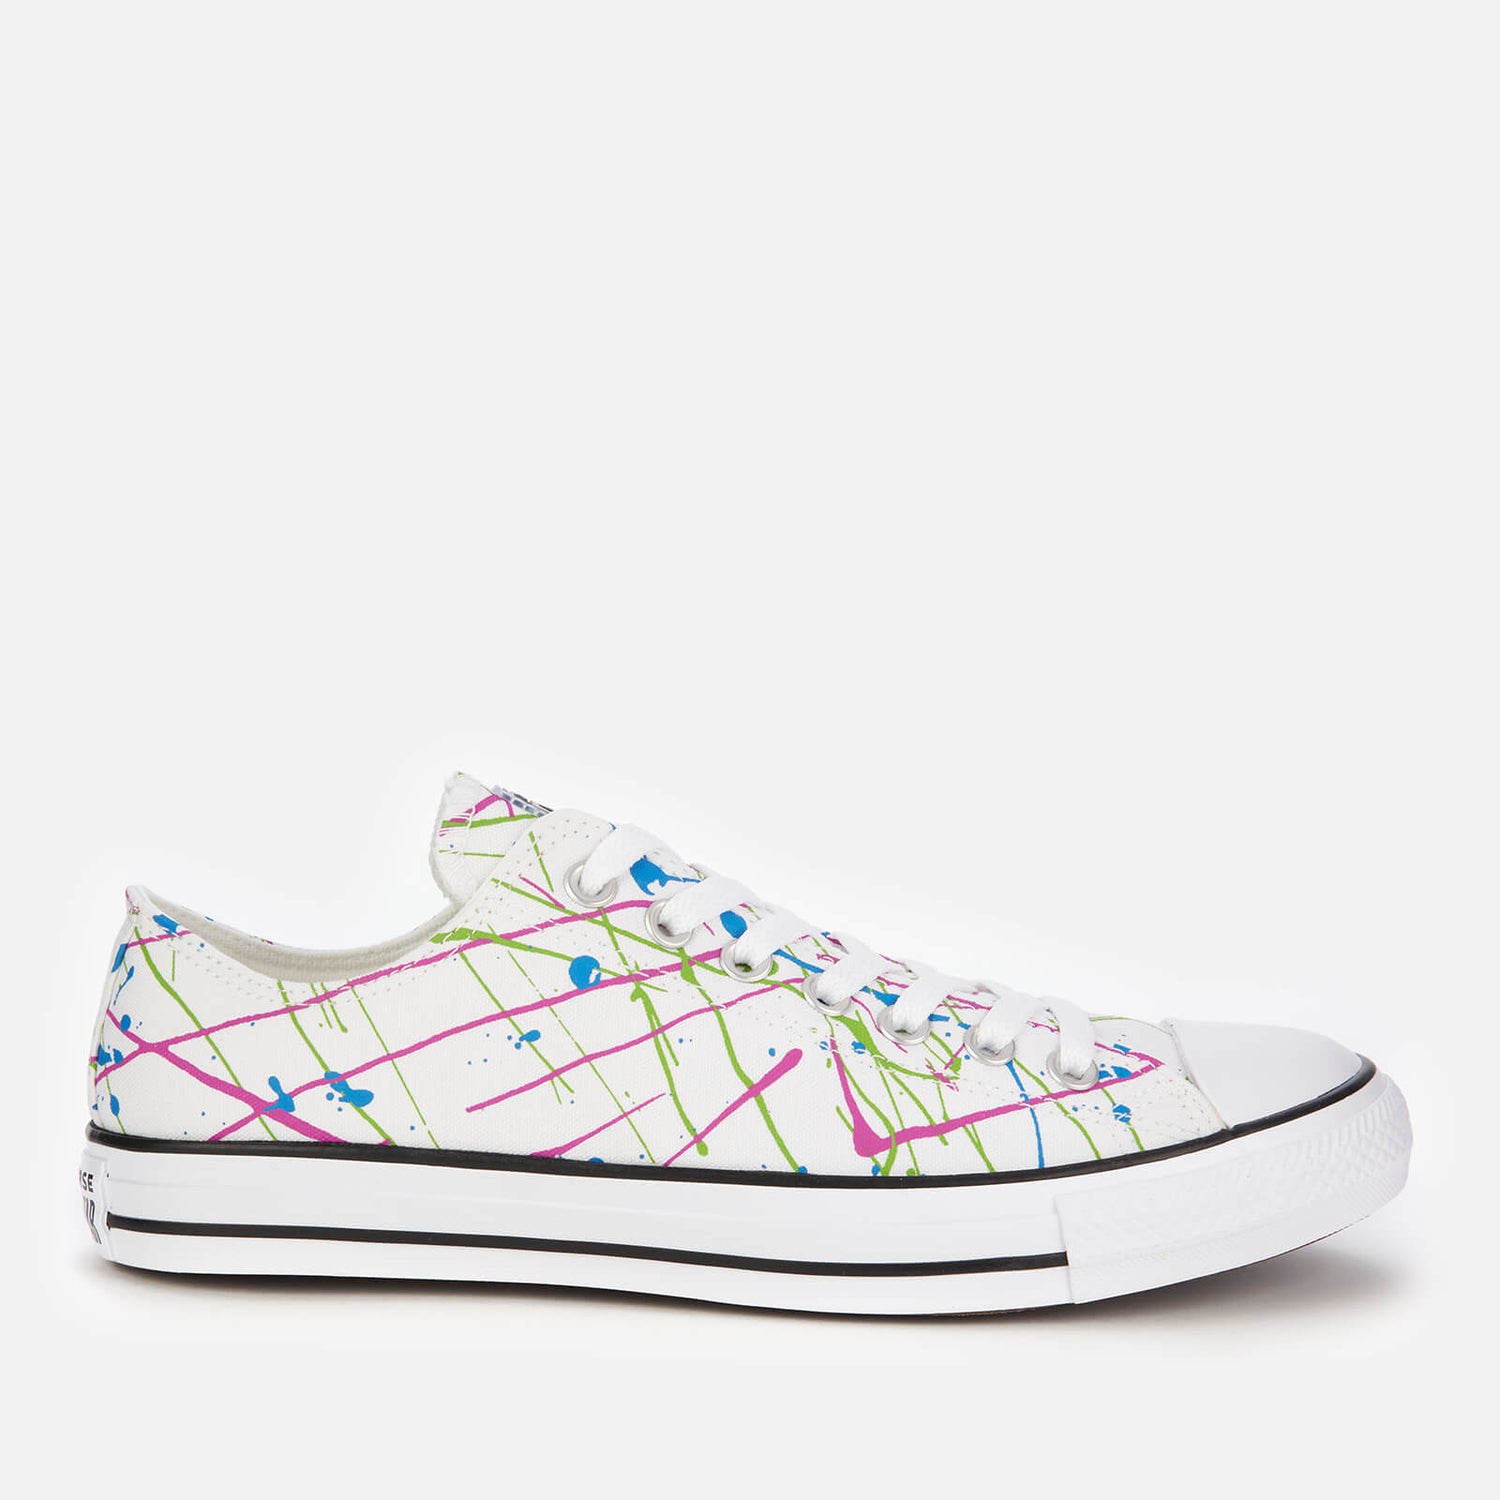 Converse Men's Chuck Taylor All Star Archive Paint Splatter Print Ox Trainers - White